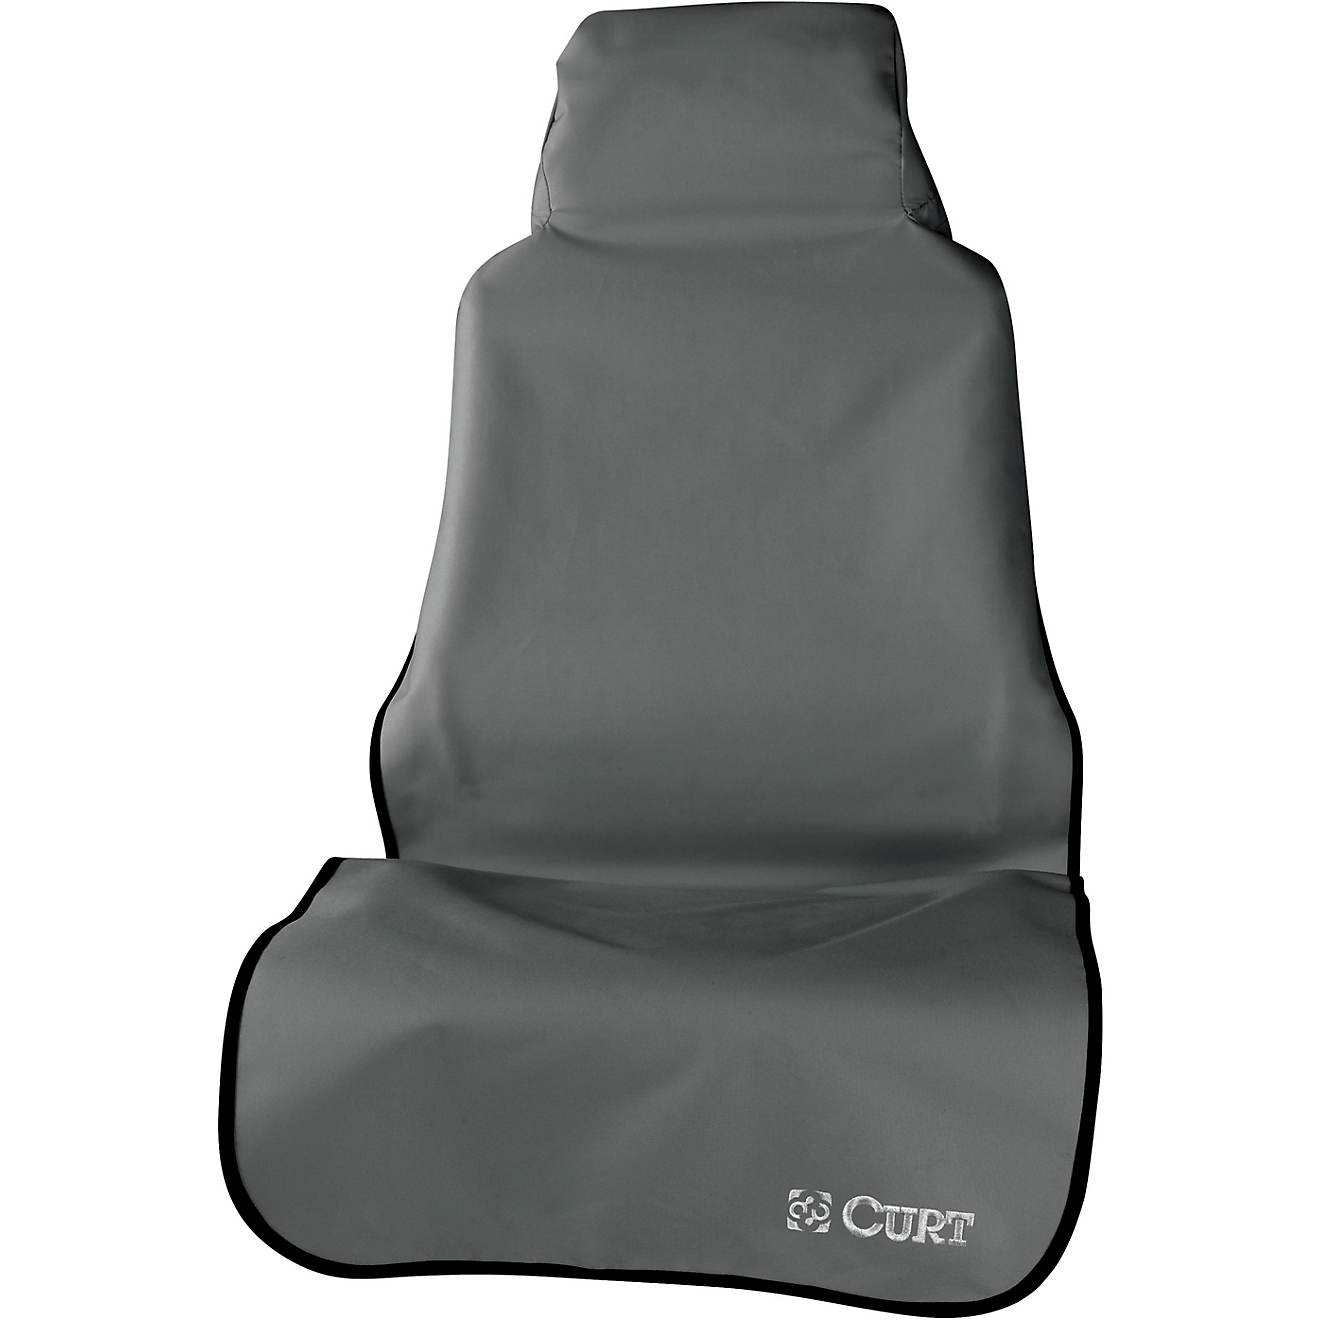 CURT 18502 Seat Defender Bucket Seat Cover                                                                                       - view number 1